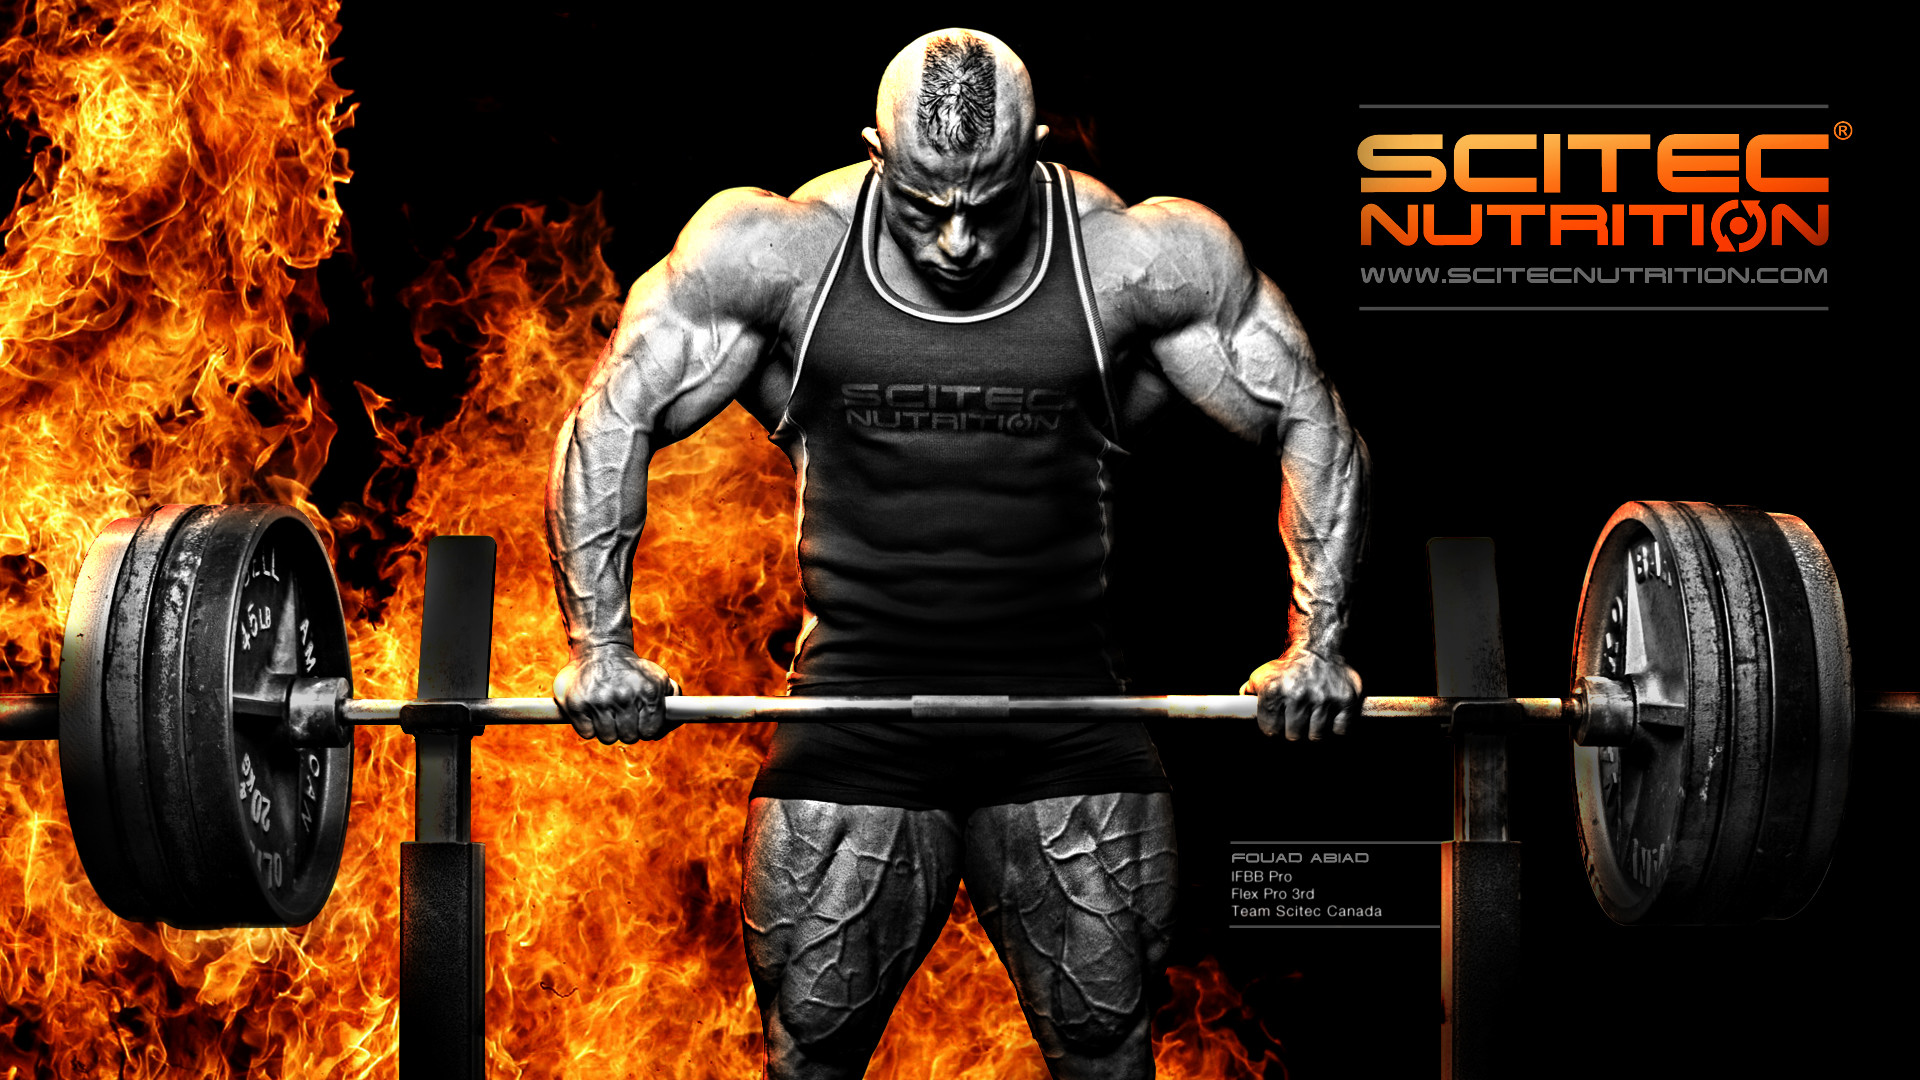 1920x1080 Scitec Nutrition Wallpaper | Fouad Abiad | Fitness & Bodybuilding  Sportnahrung | Pinned https:/